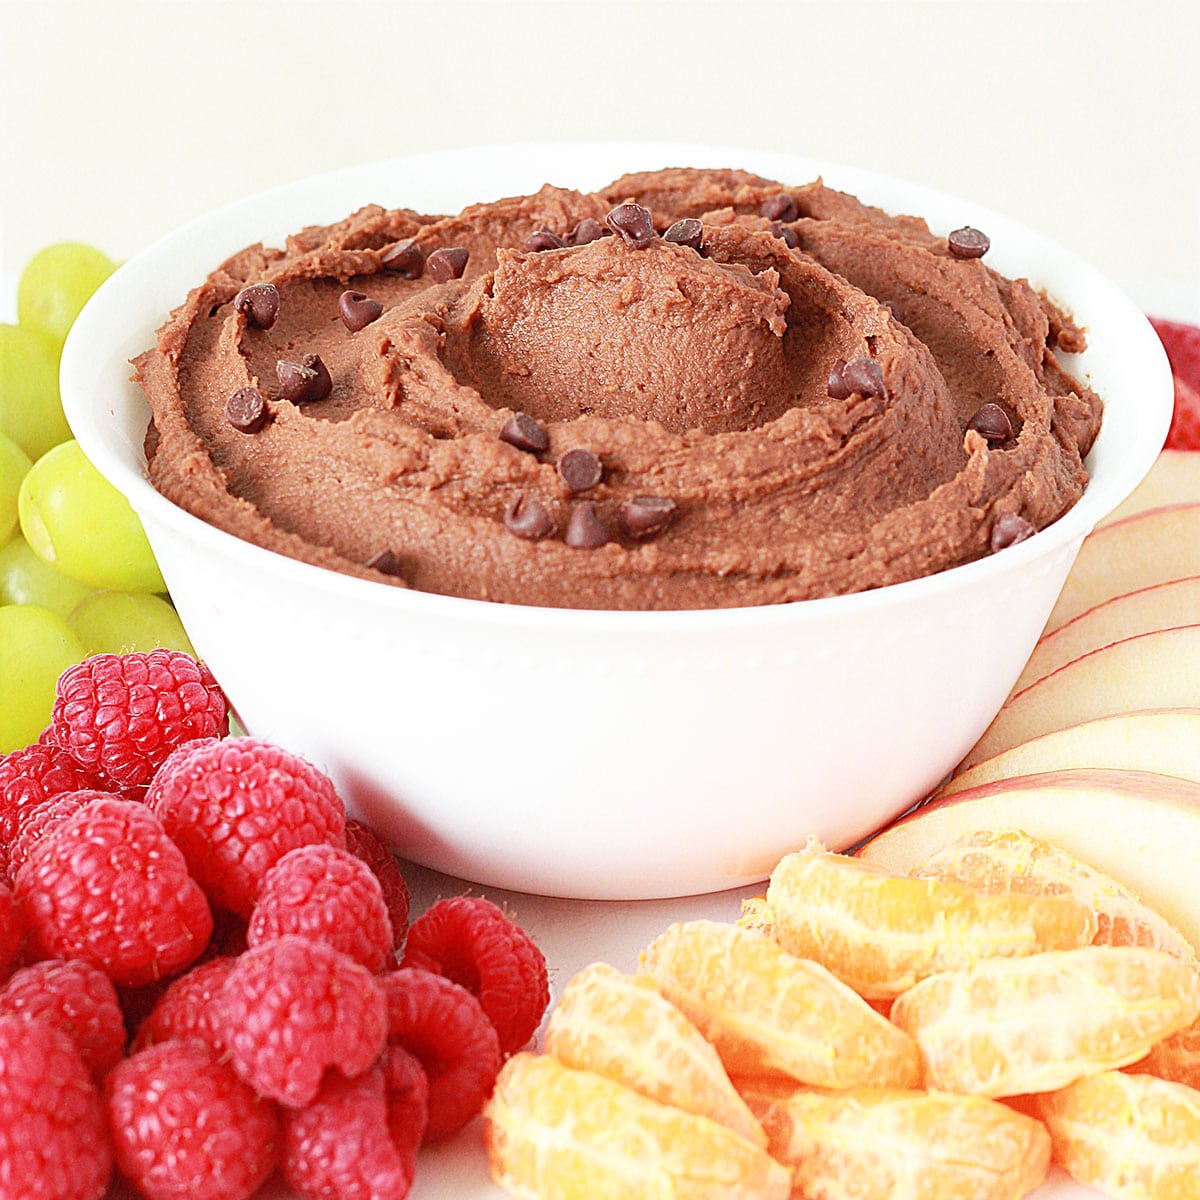 A bowl of chocolate hummus topped with a fruit platter for dipping